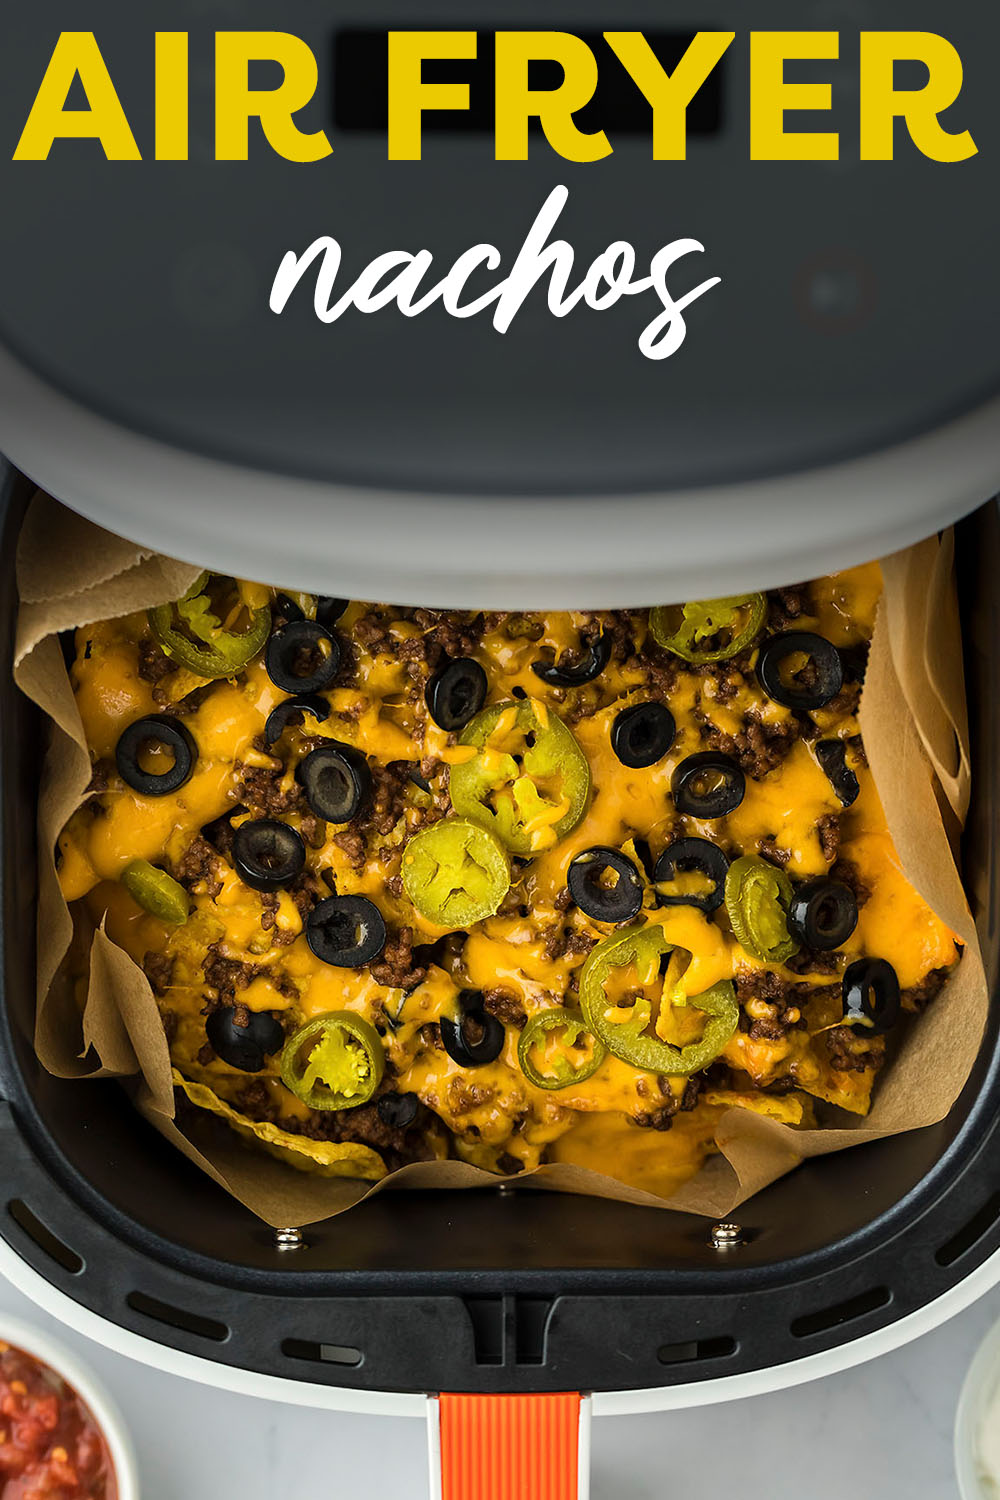 Air Fryer Nachos are made with seasoned ground beef, tortilla chips, and all the melty cheese and toppings to go with it! Enjoy these nachos while watching the big game or serve them up as a quick meal!